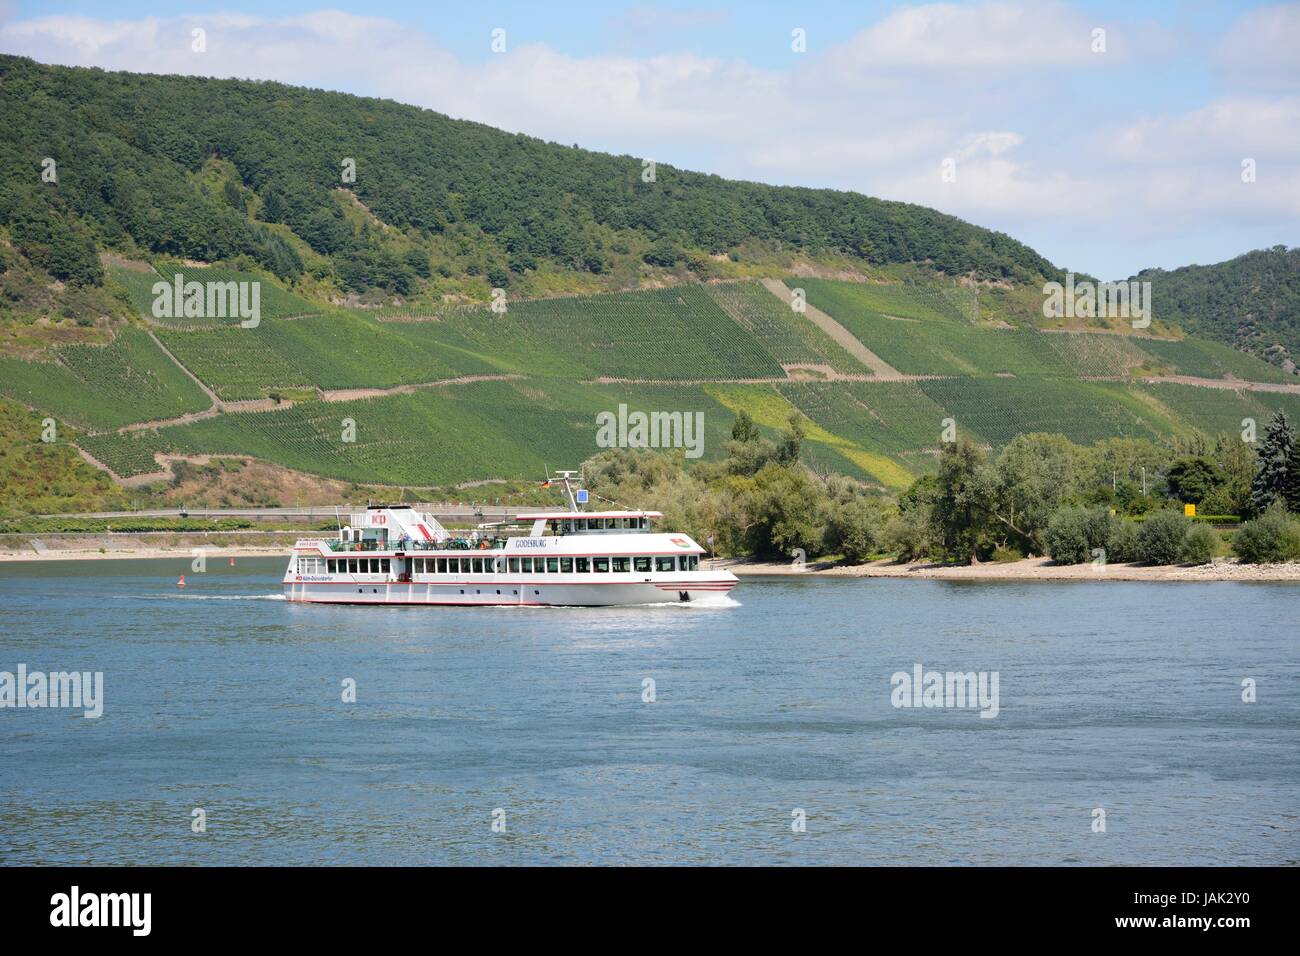 BOPPARD, GERMANY - SEPTEMBER 2: Tourists making a ship round trip on the river Rhein in Boppard, Germany on September 2, 2013. The ship Godesburg belongs to the KD river cruise company founded in 1853. Foto taken from the Rheinalle with view accross the river. Stock Photo